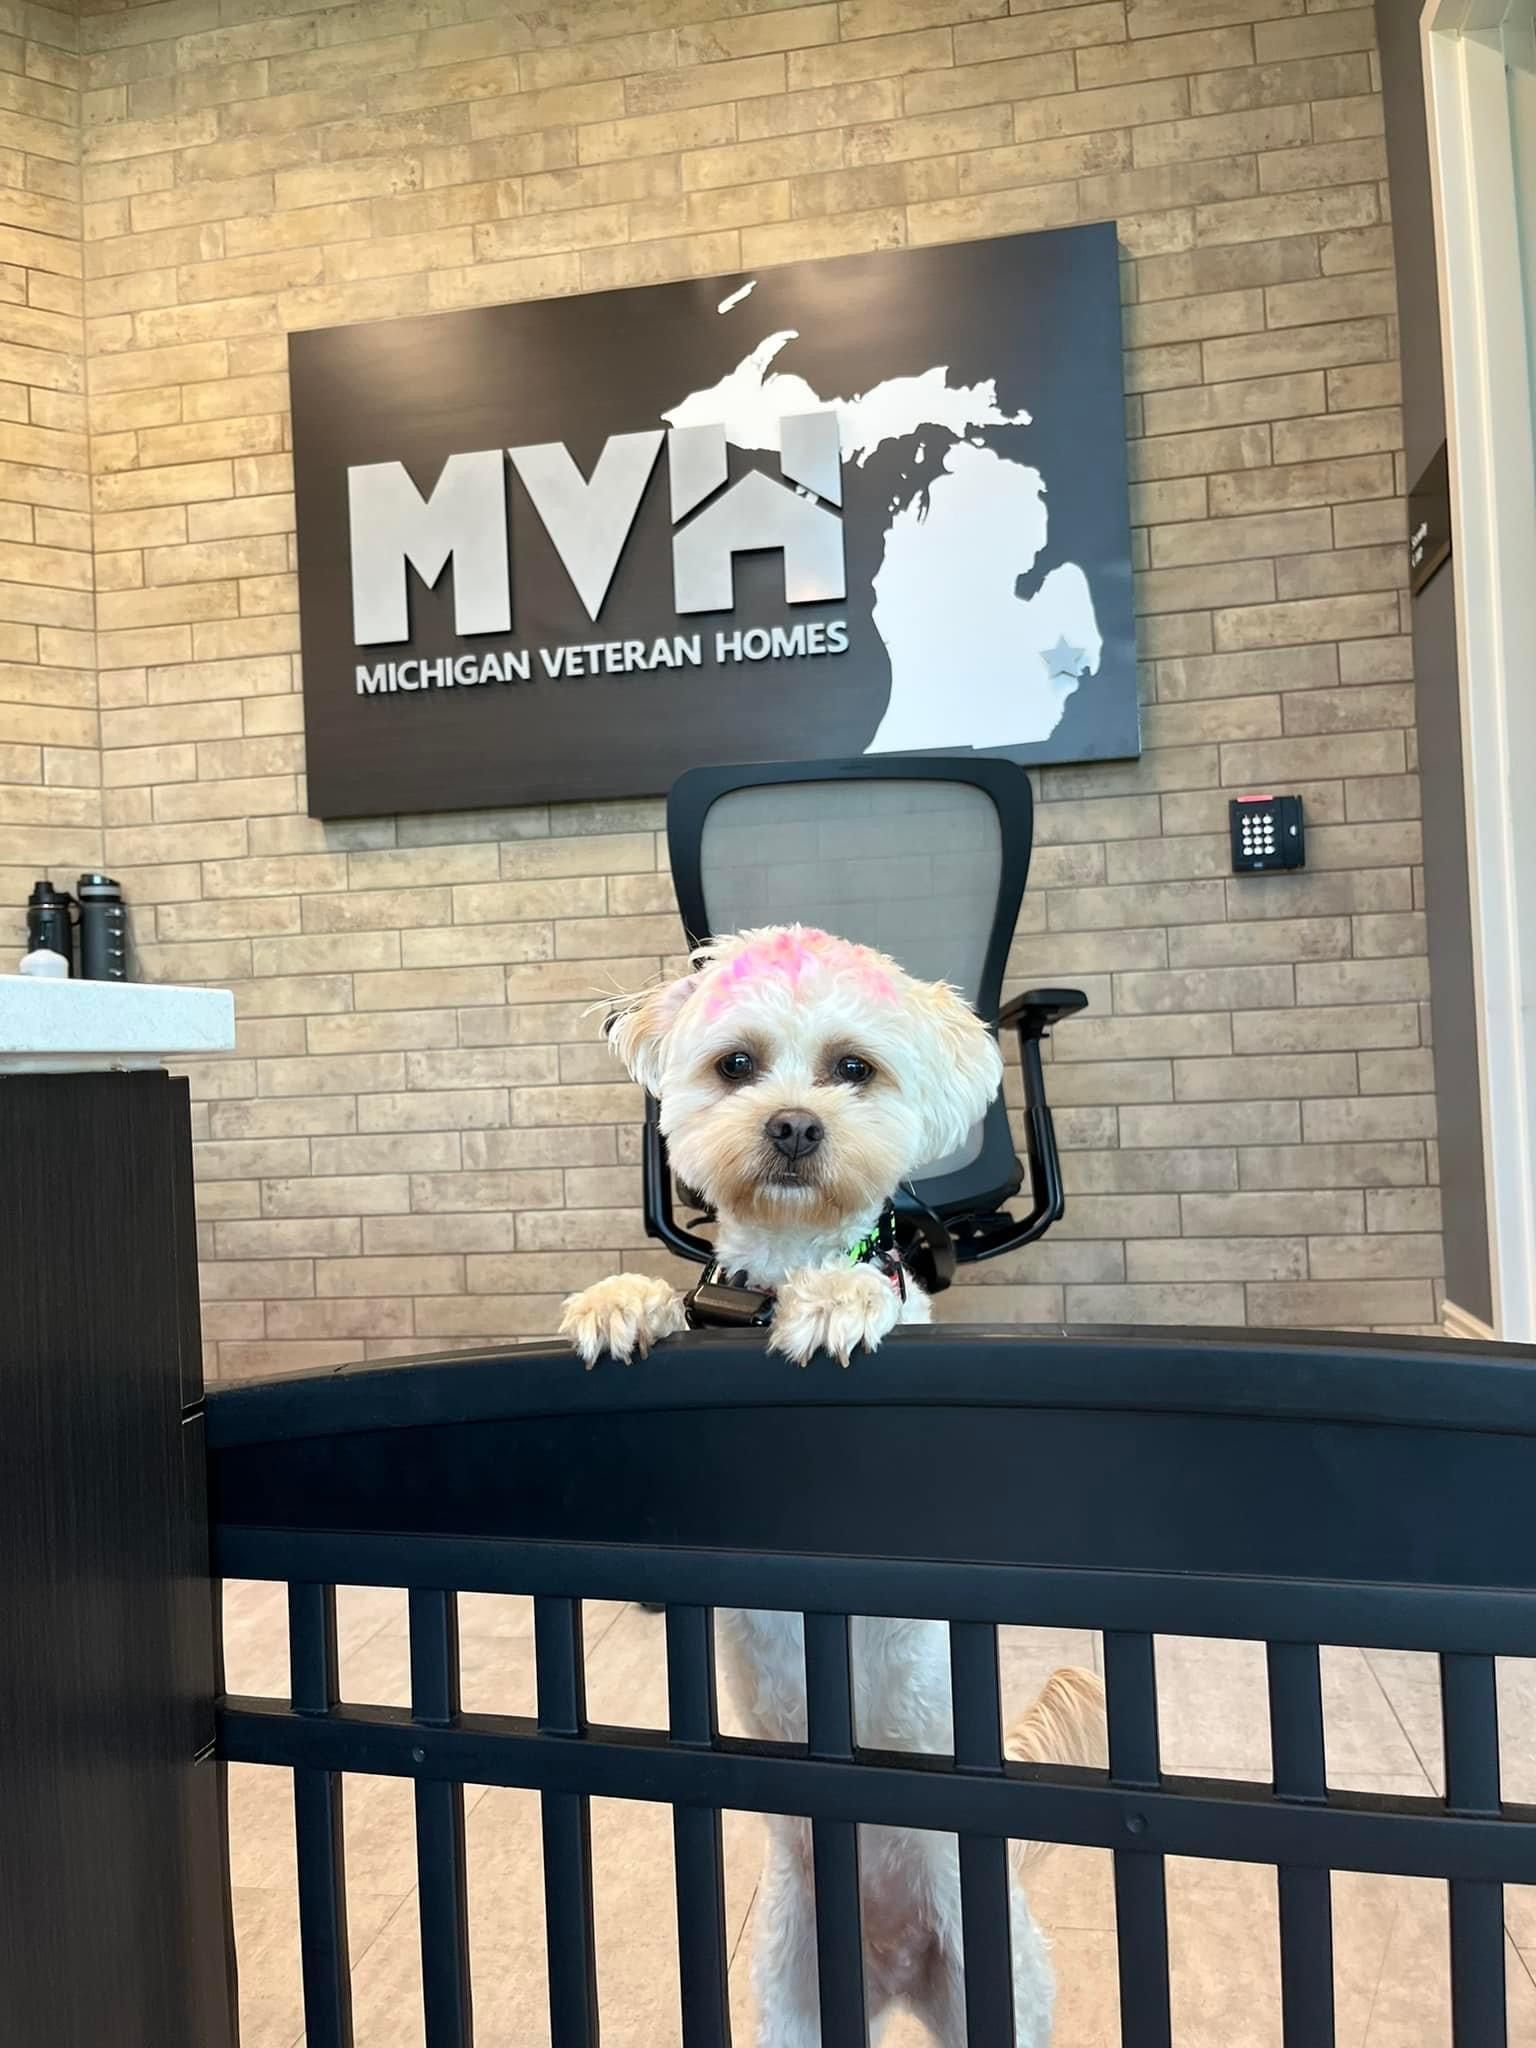 A small dog sitting in front of a mvh sign